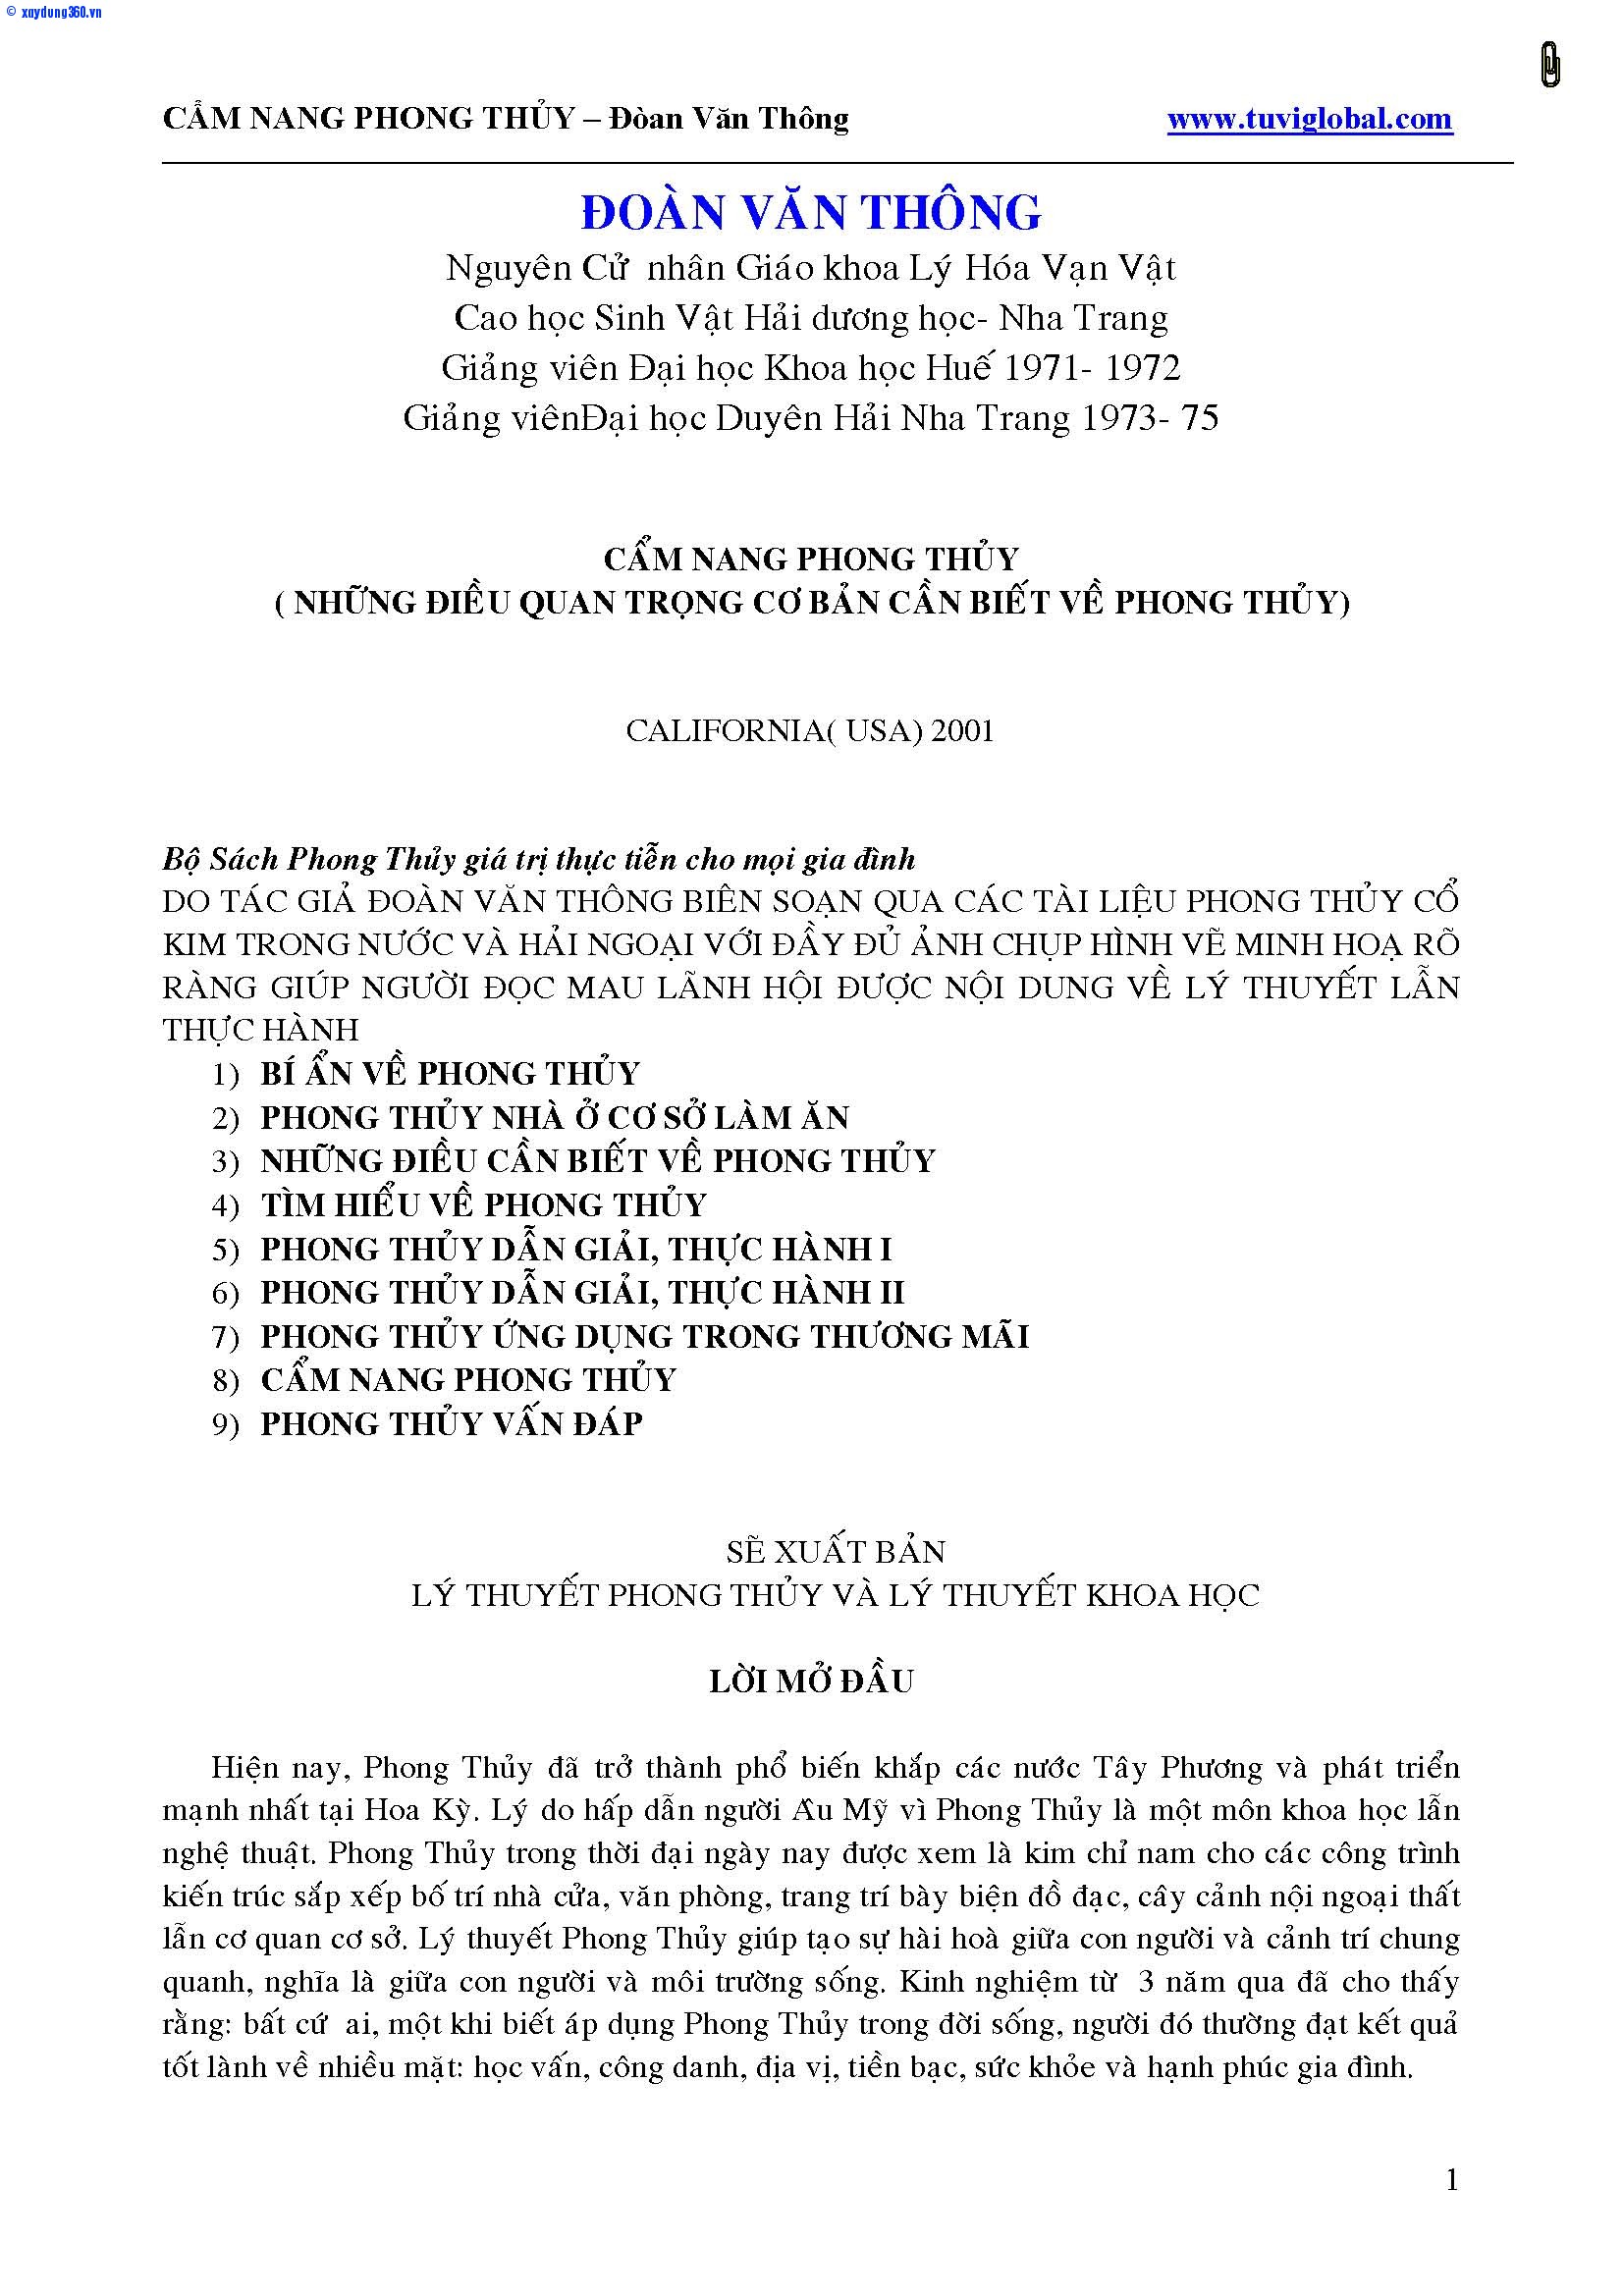 Pages from cam_nang_phong_thuy.jpg